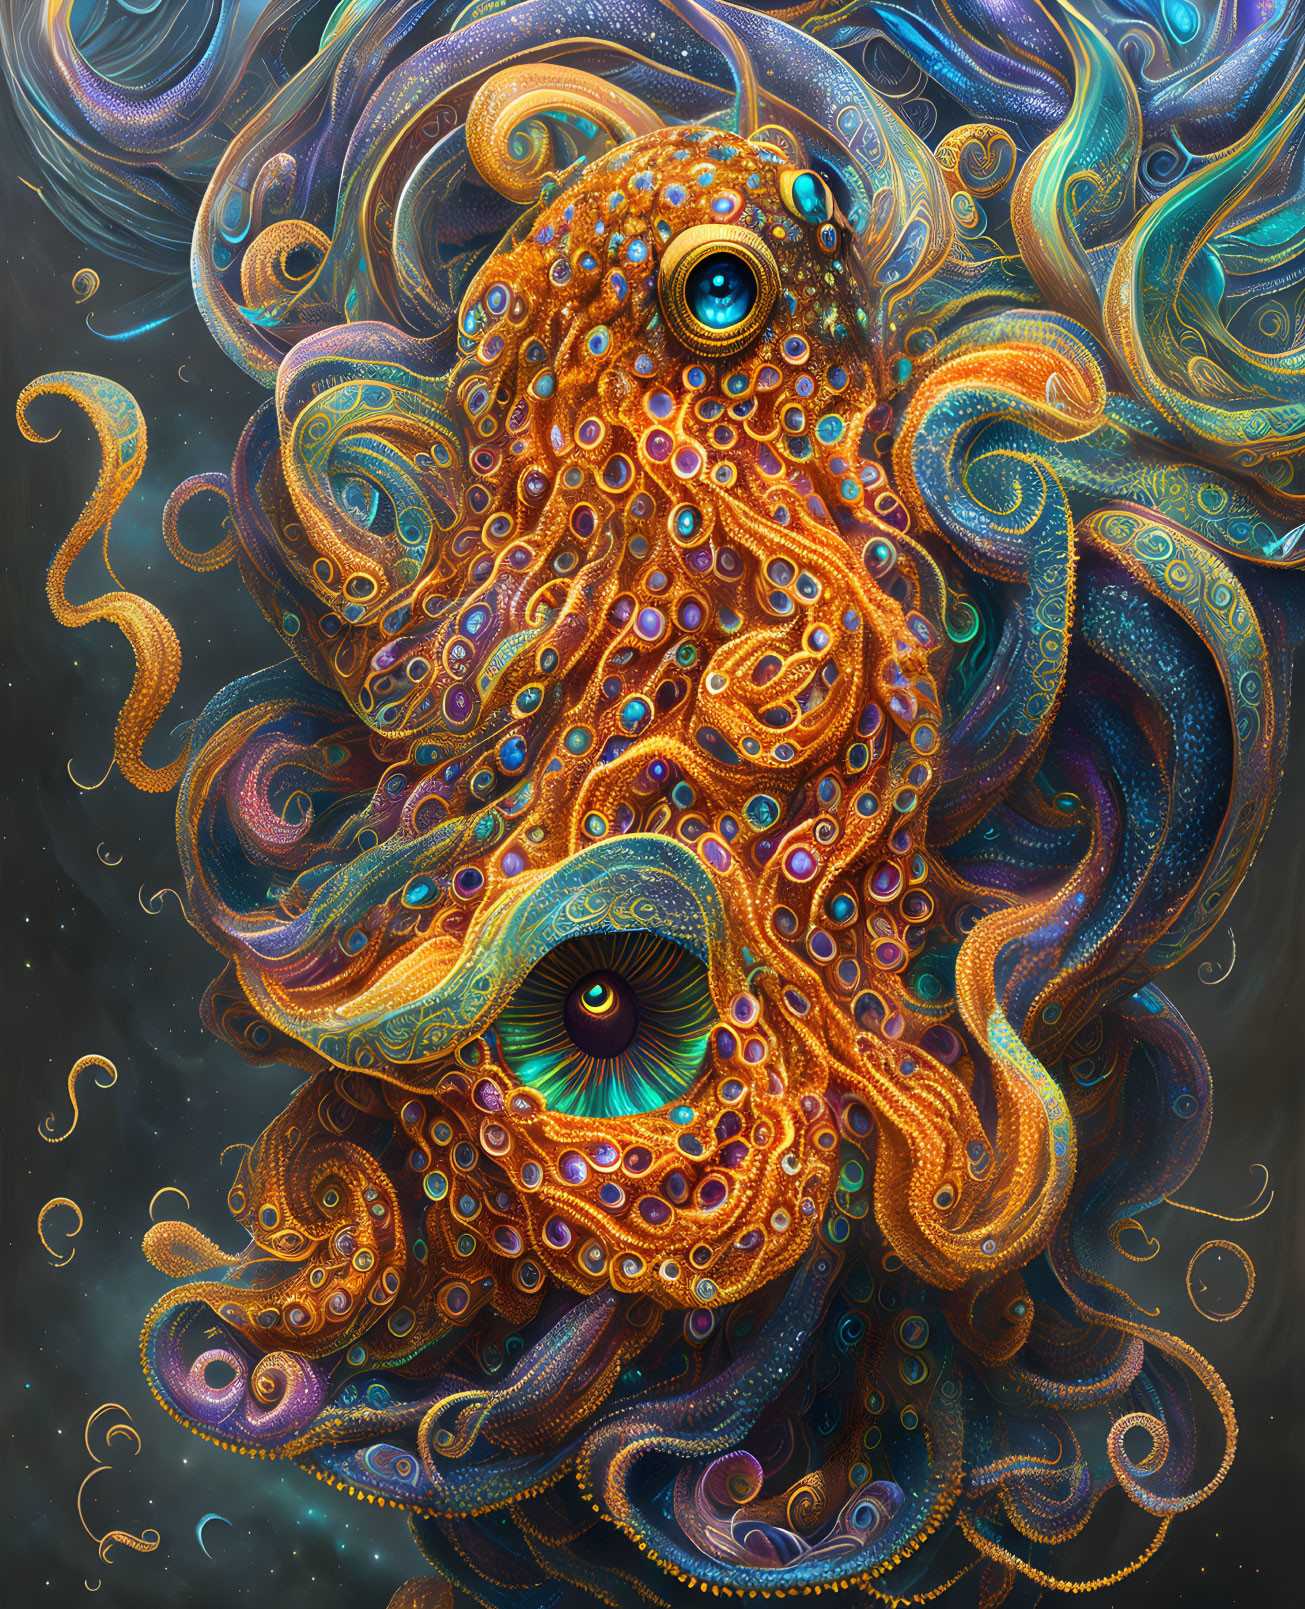 Colorful Octopus with Swirling Tentacles and Intricate Patterns